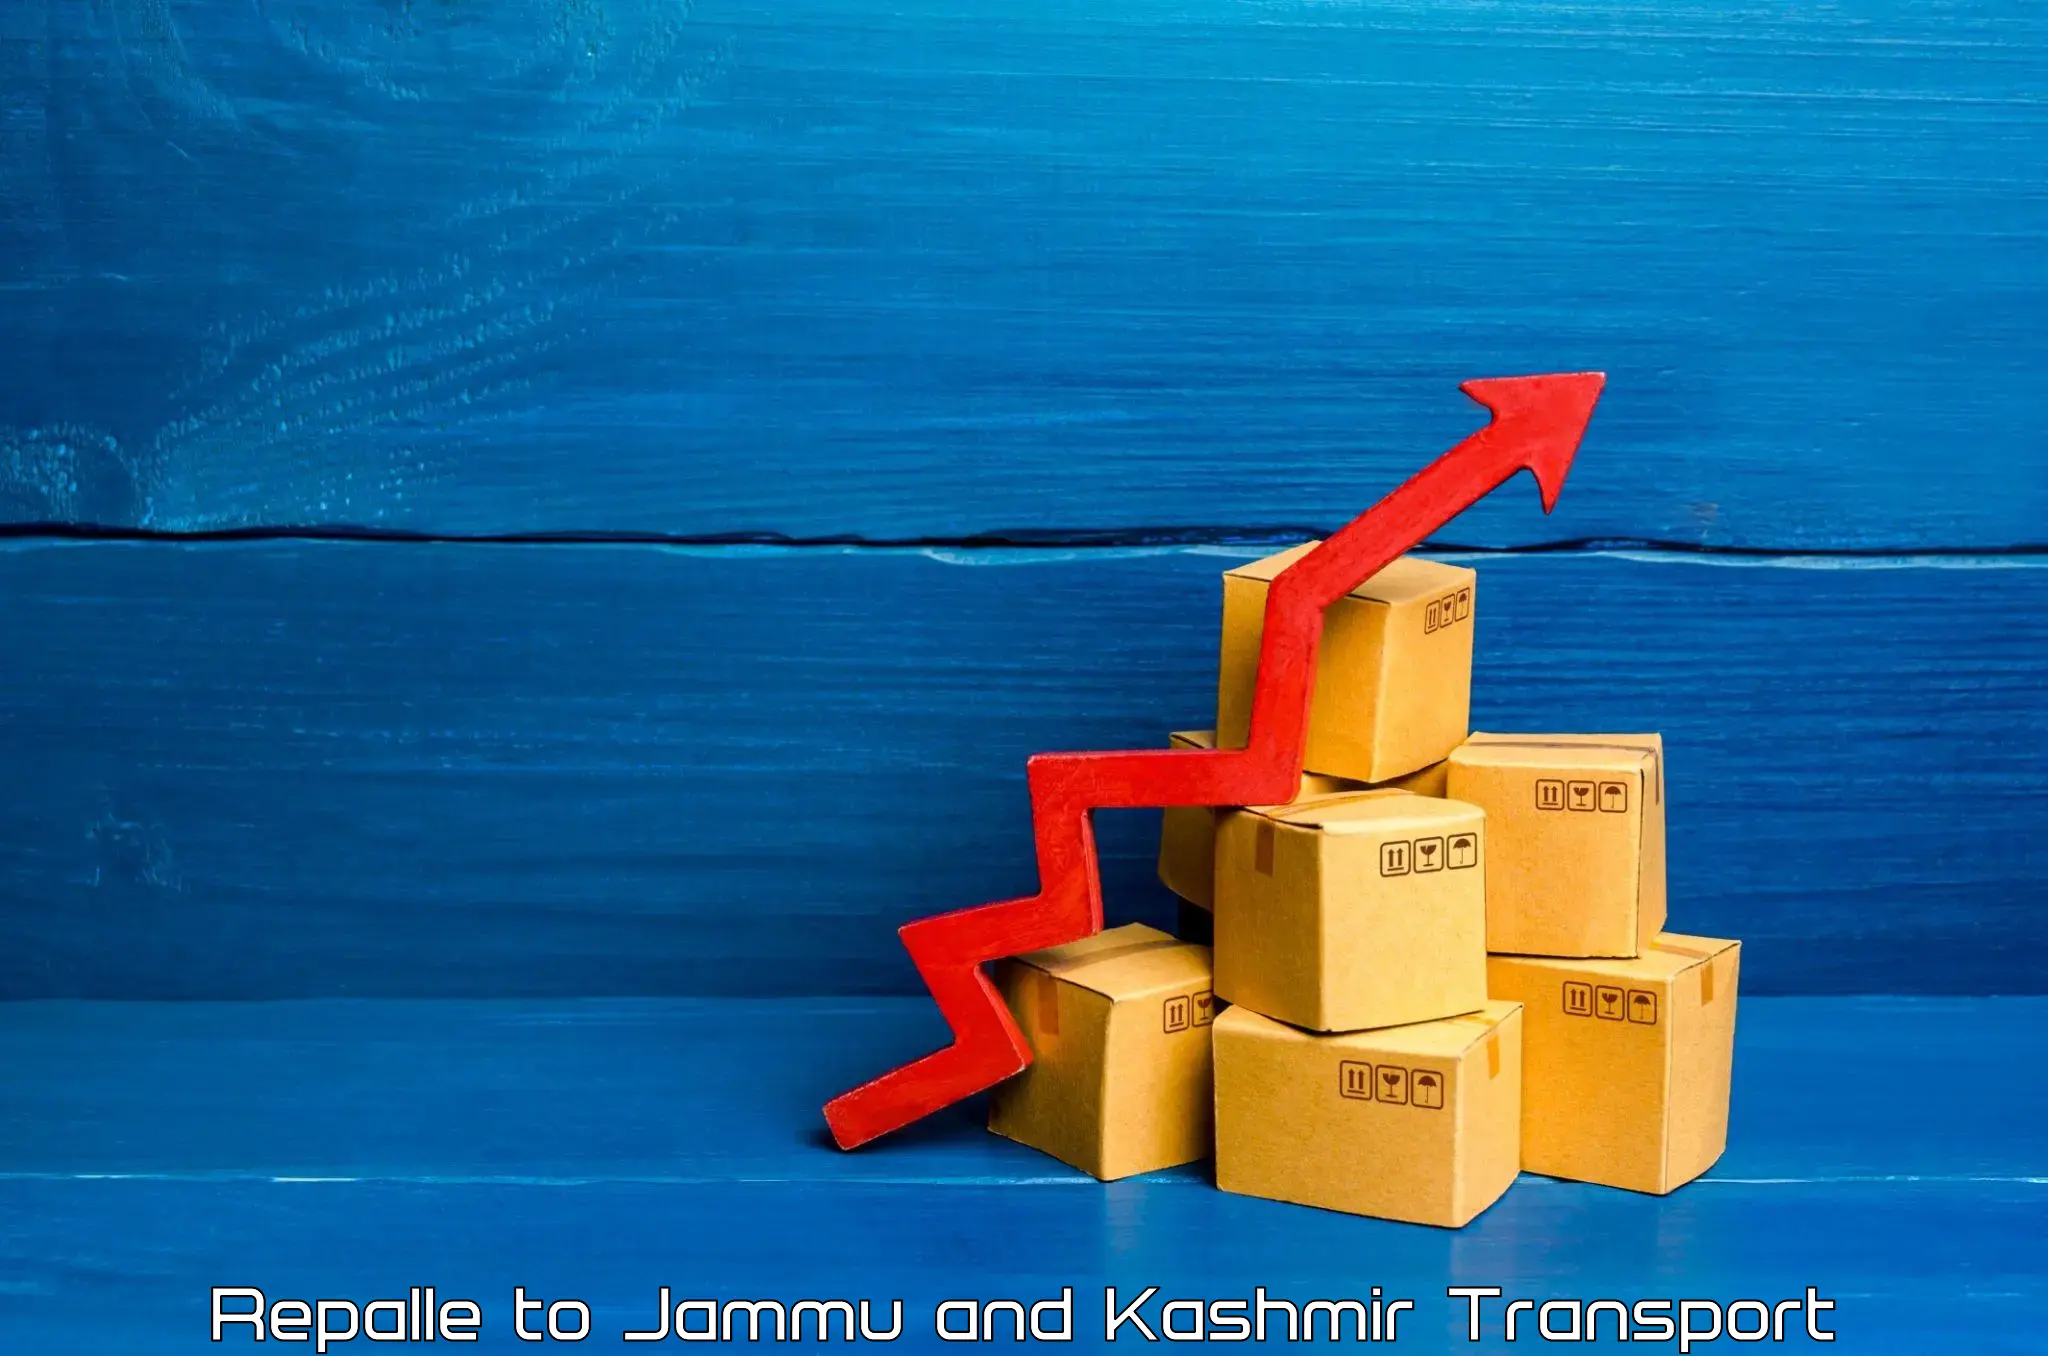 Cargo train transport services Repalle to Jammu and Kashmir